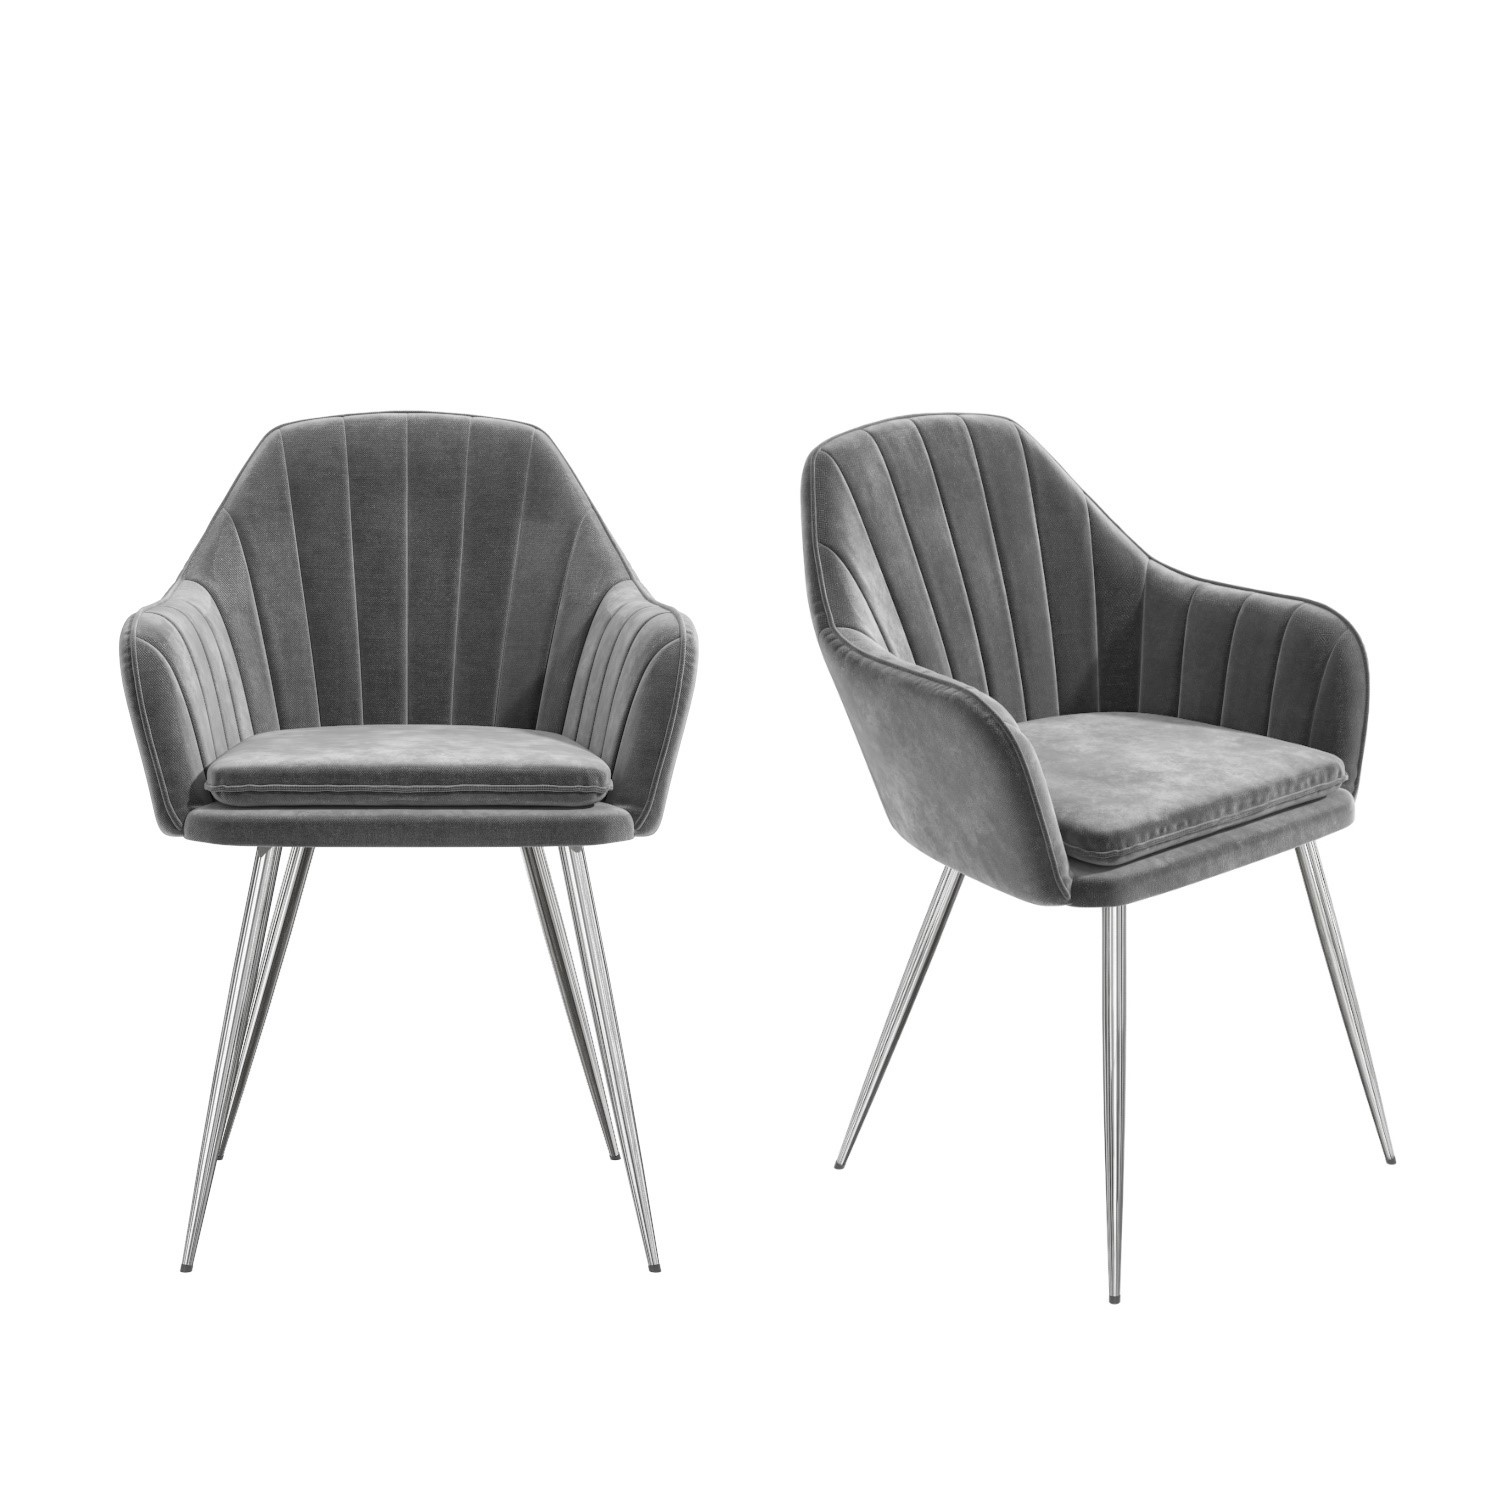 Set Of 2 Grey Velvet Dining Tub Chairs, Grey Real Leather Dining Room Chairs With Chrome Legs Set Of 4